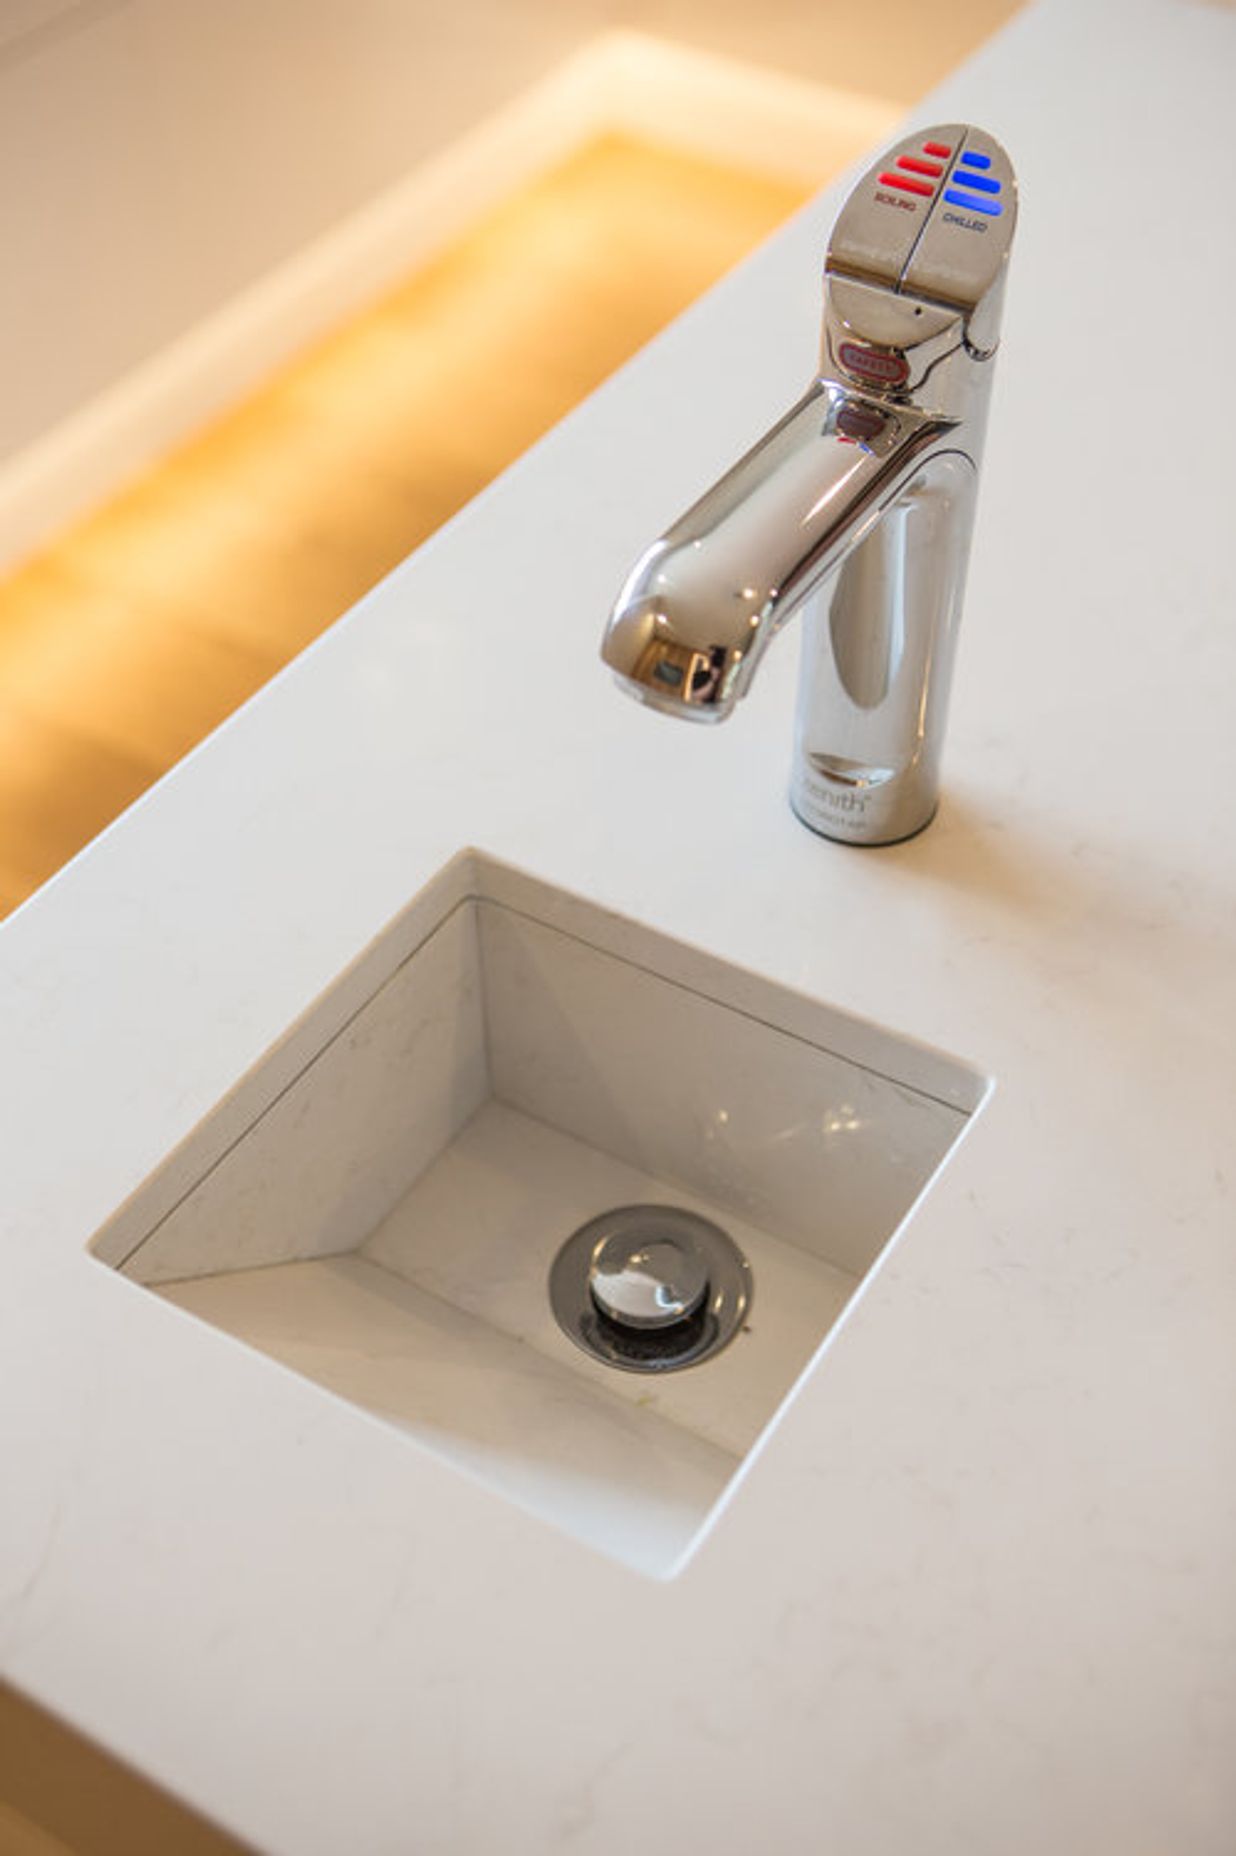 A custom stone drip-sink was designed into the island benchtop to work with a Zenith hydro tap which supplies boiling, filtered, and sparkling water.